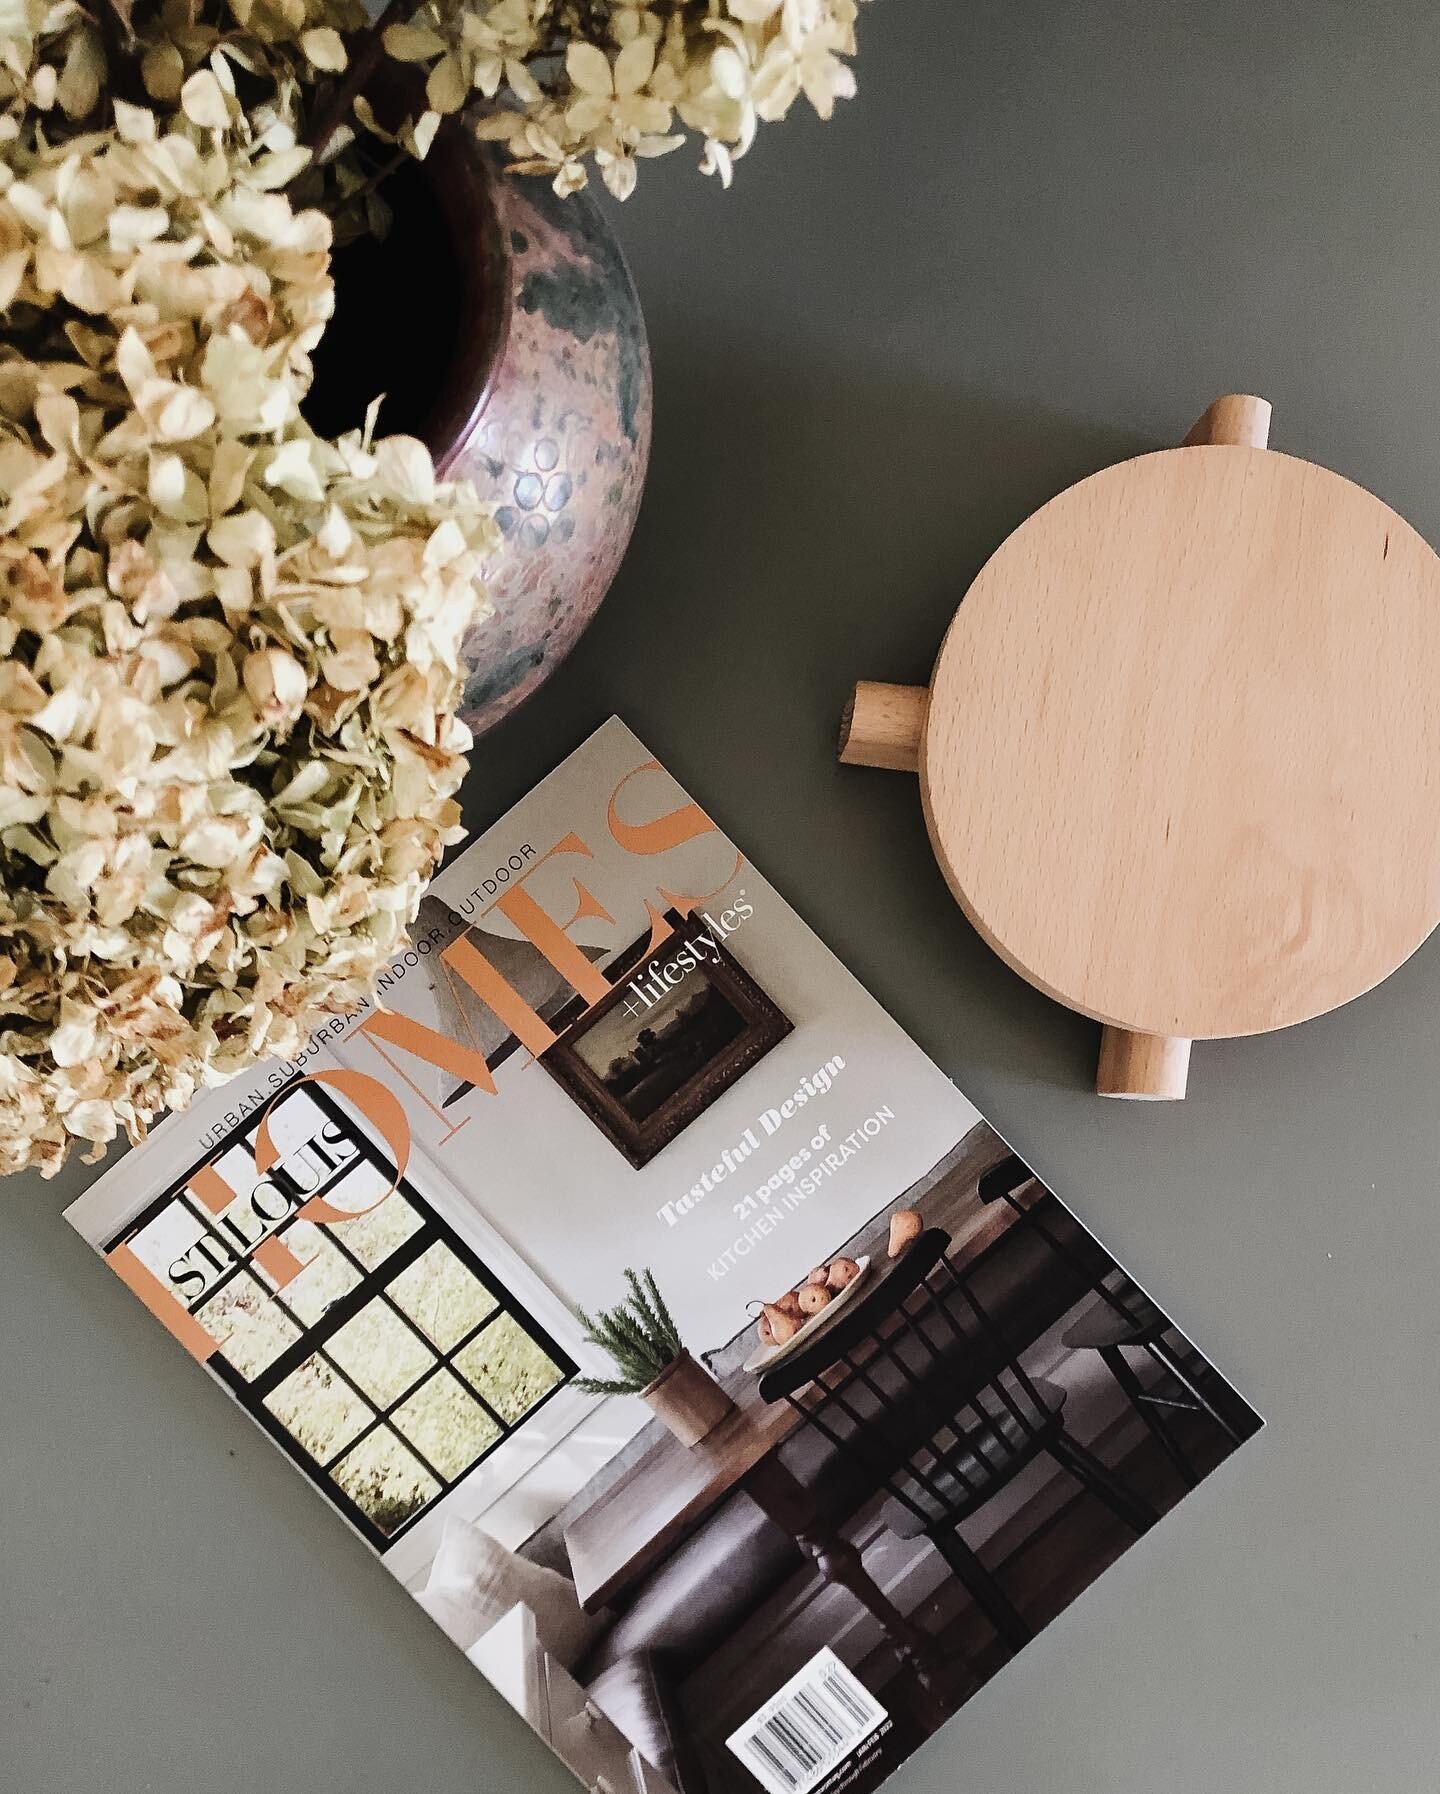 Still pinching myself that our work was on the COVER of @stlhomesmag this month! I feel so grateful. Thank you @meganlorenzphoto for being so amazing at what you do!!